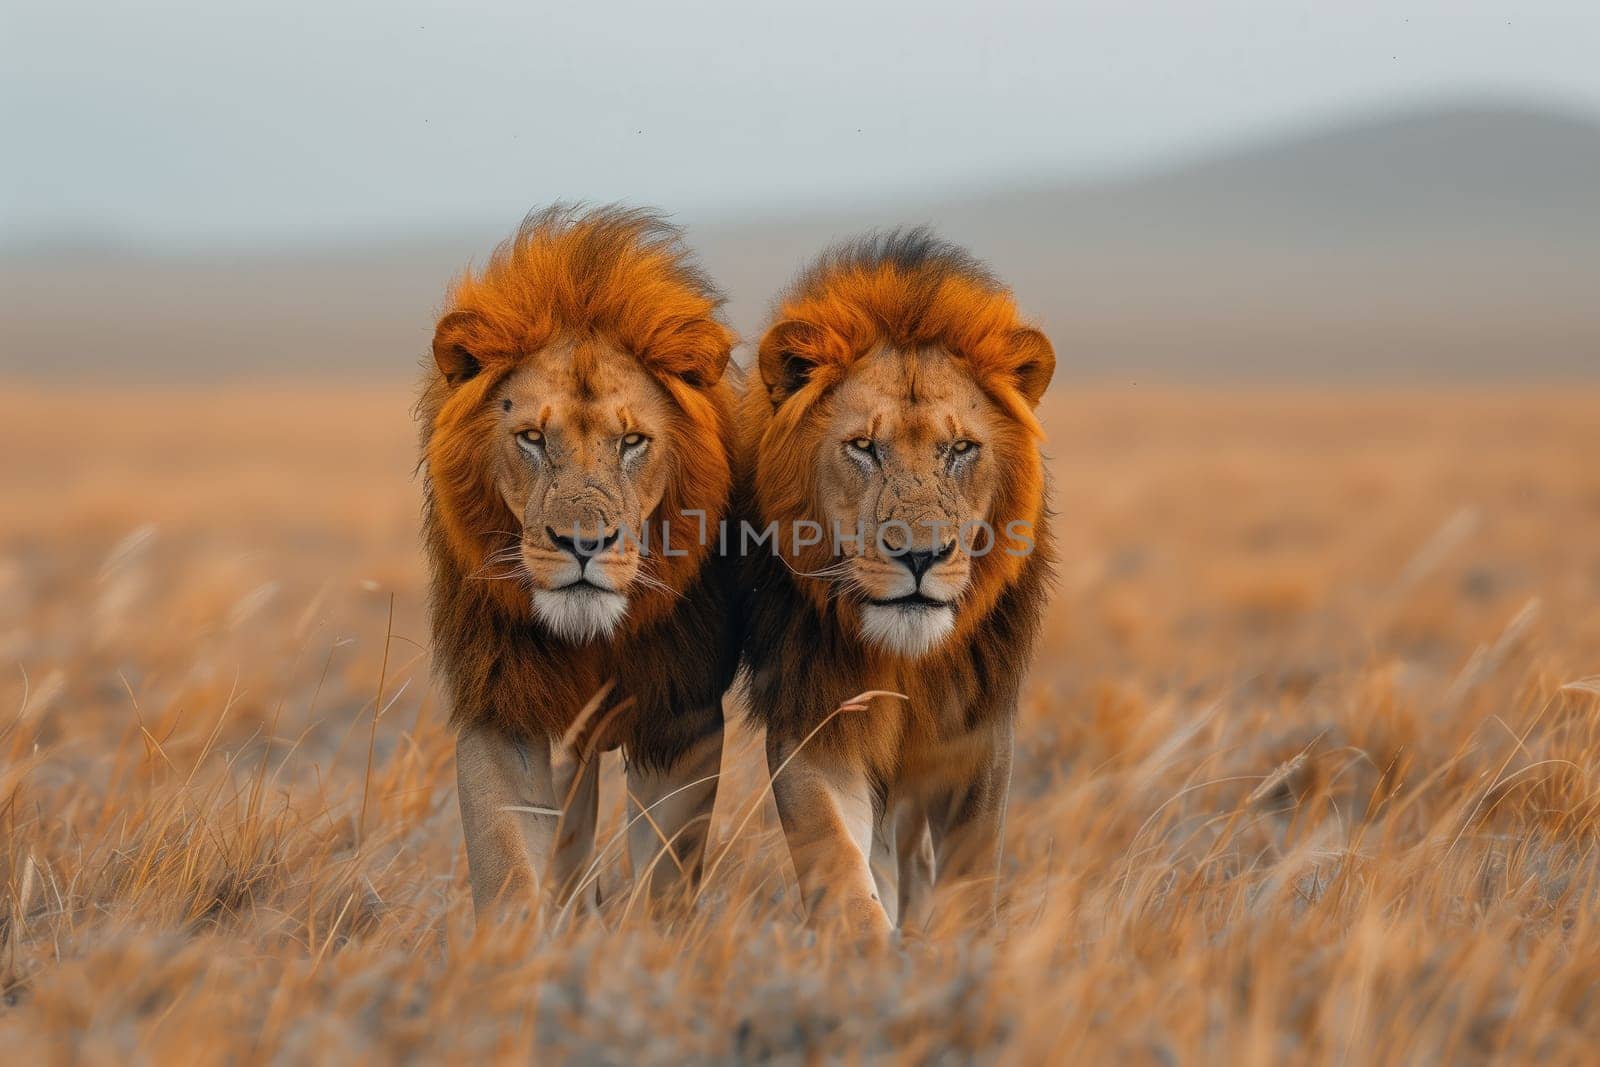 Two lions, Felidae carnivores, standing in grassy Ecoregion field by richwolf